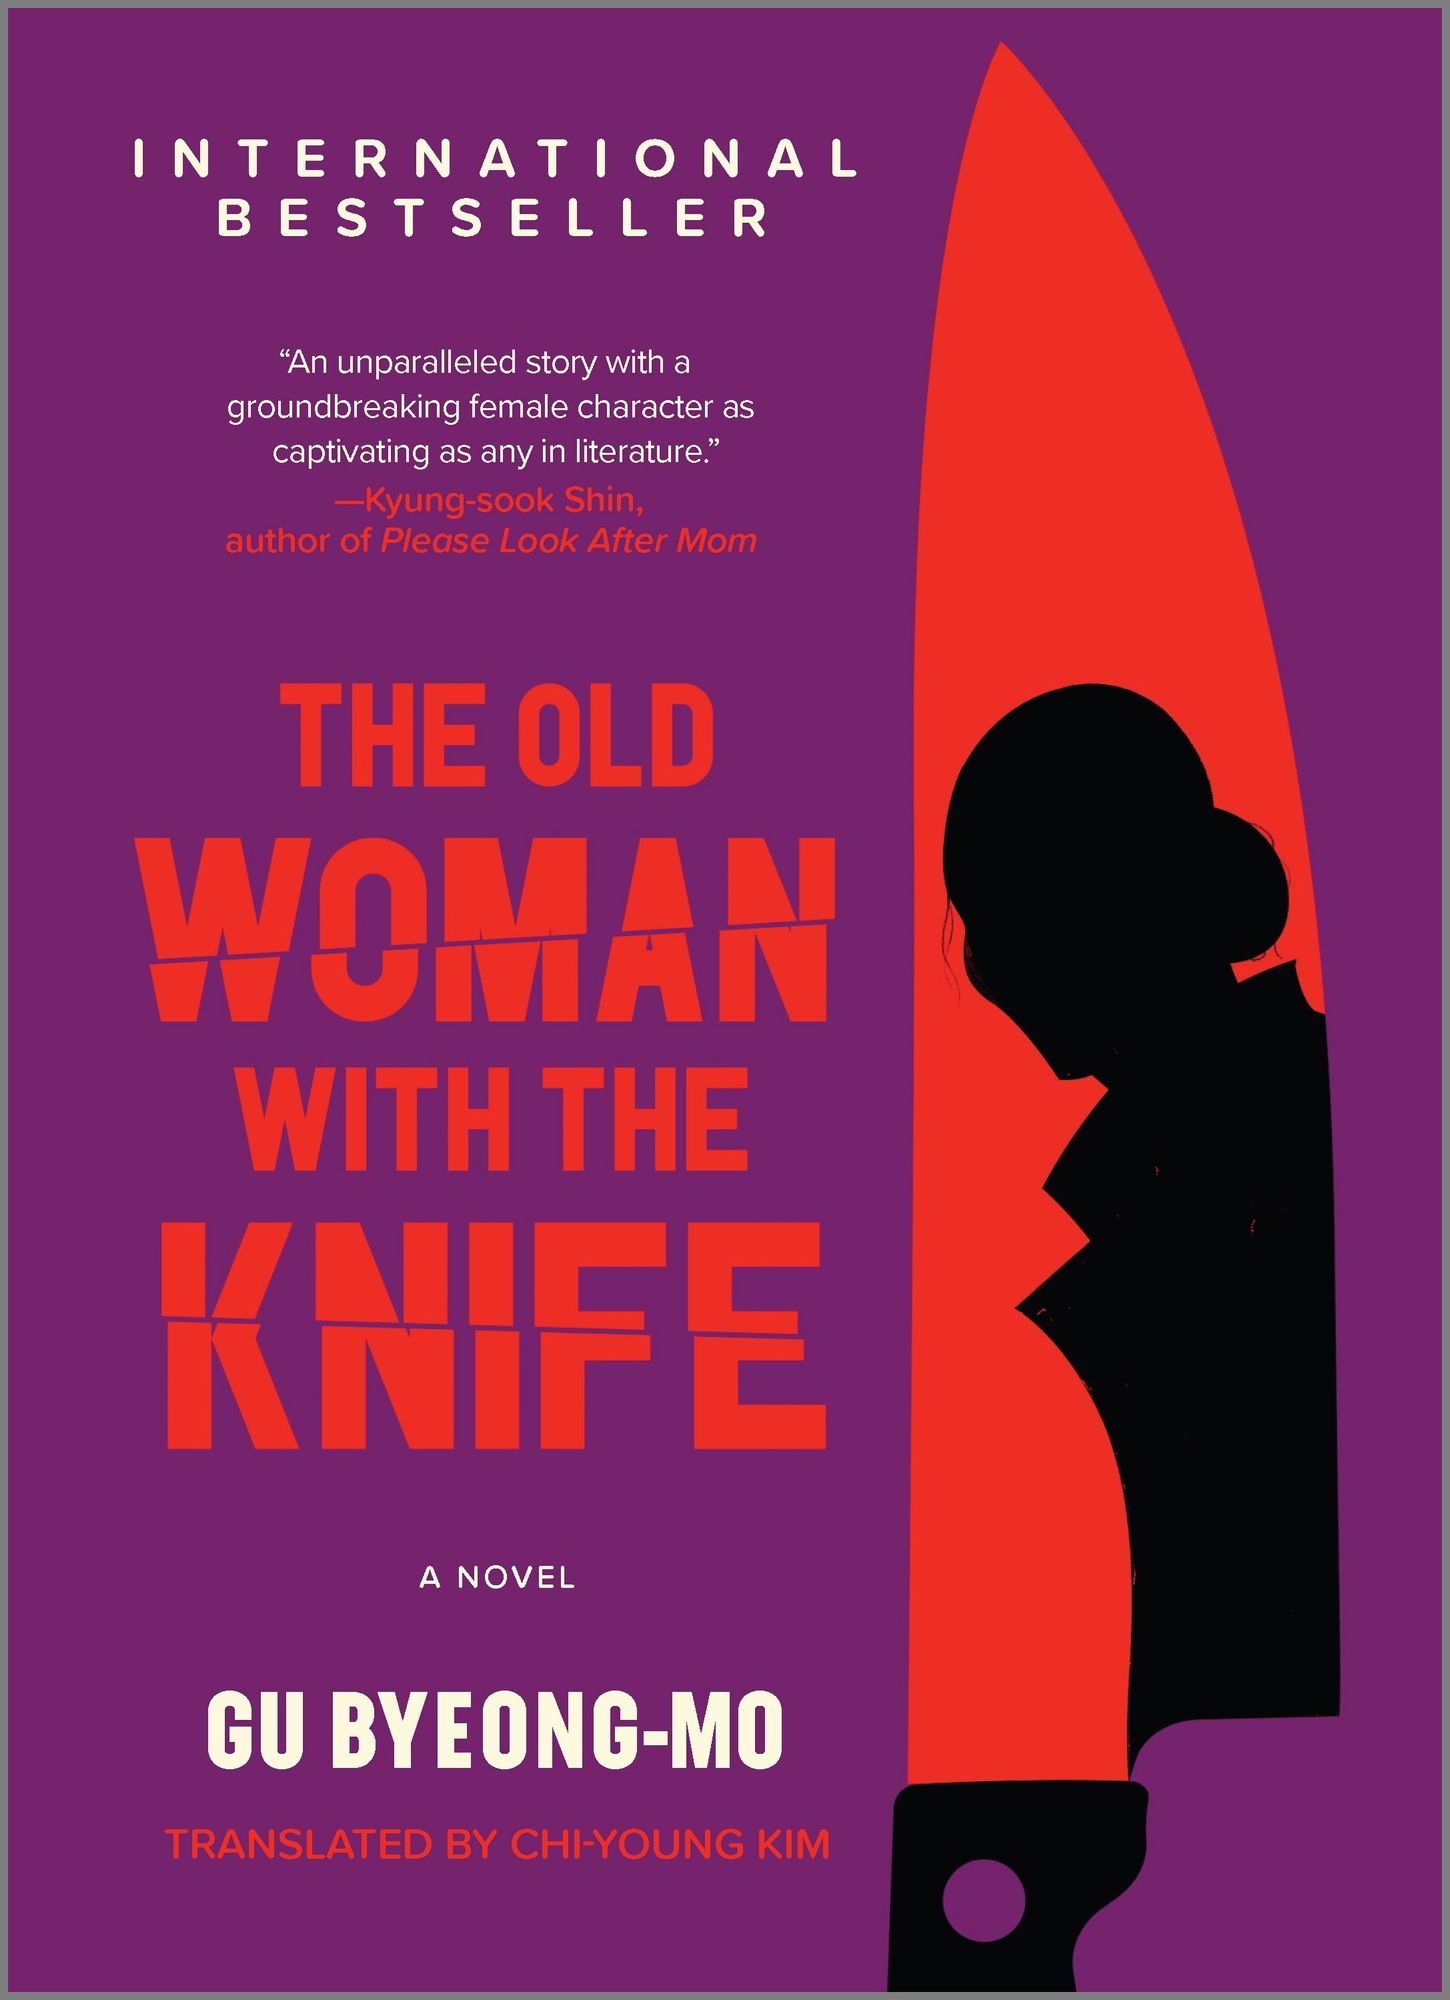 The Old Woman With The Knife by Gu Byeong